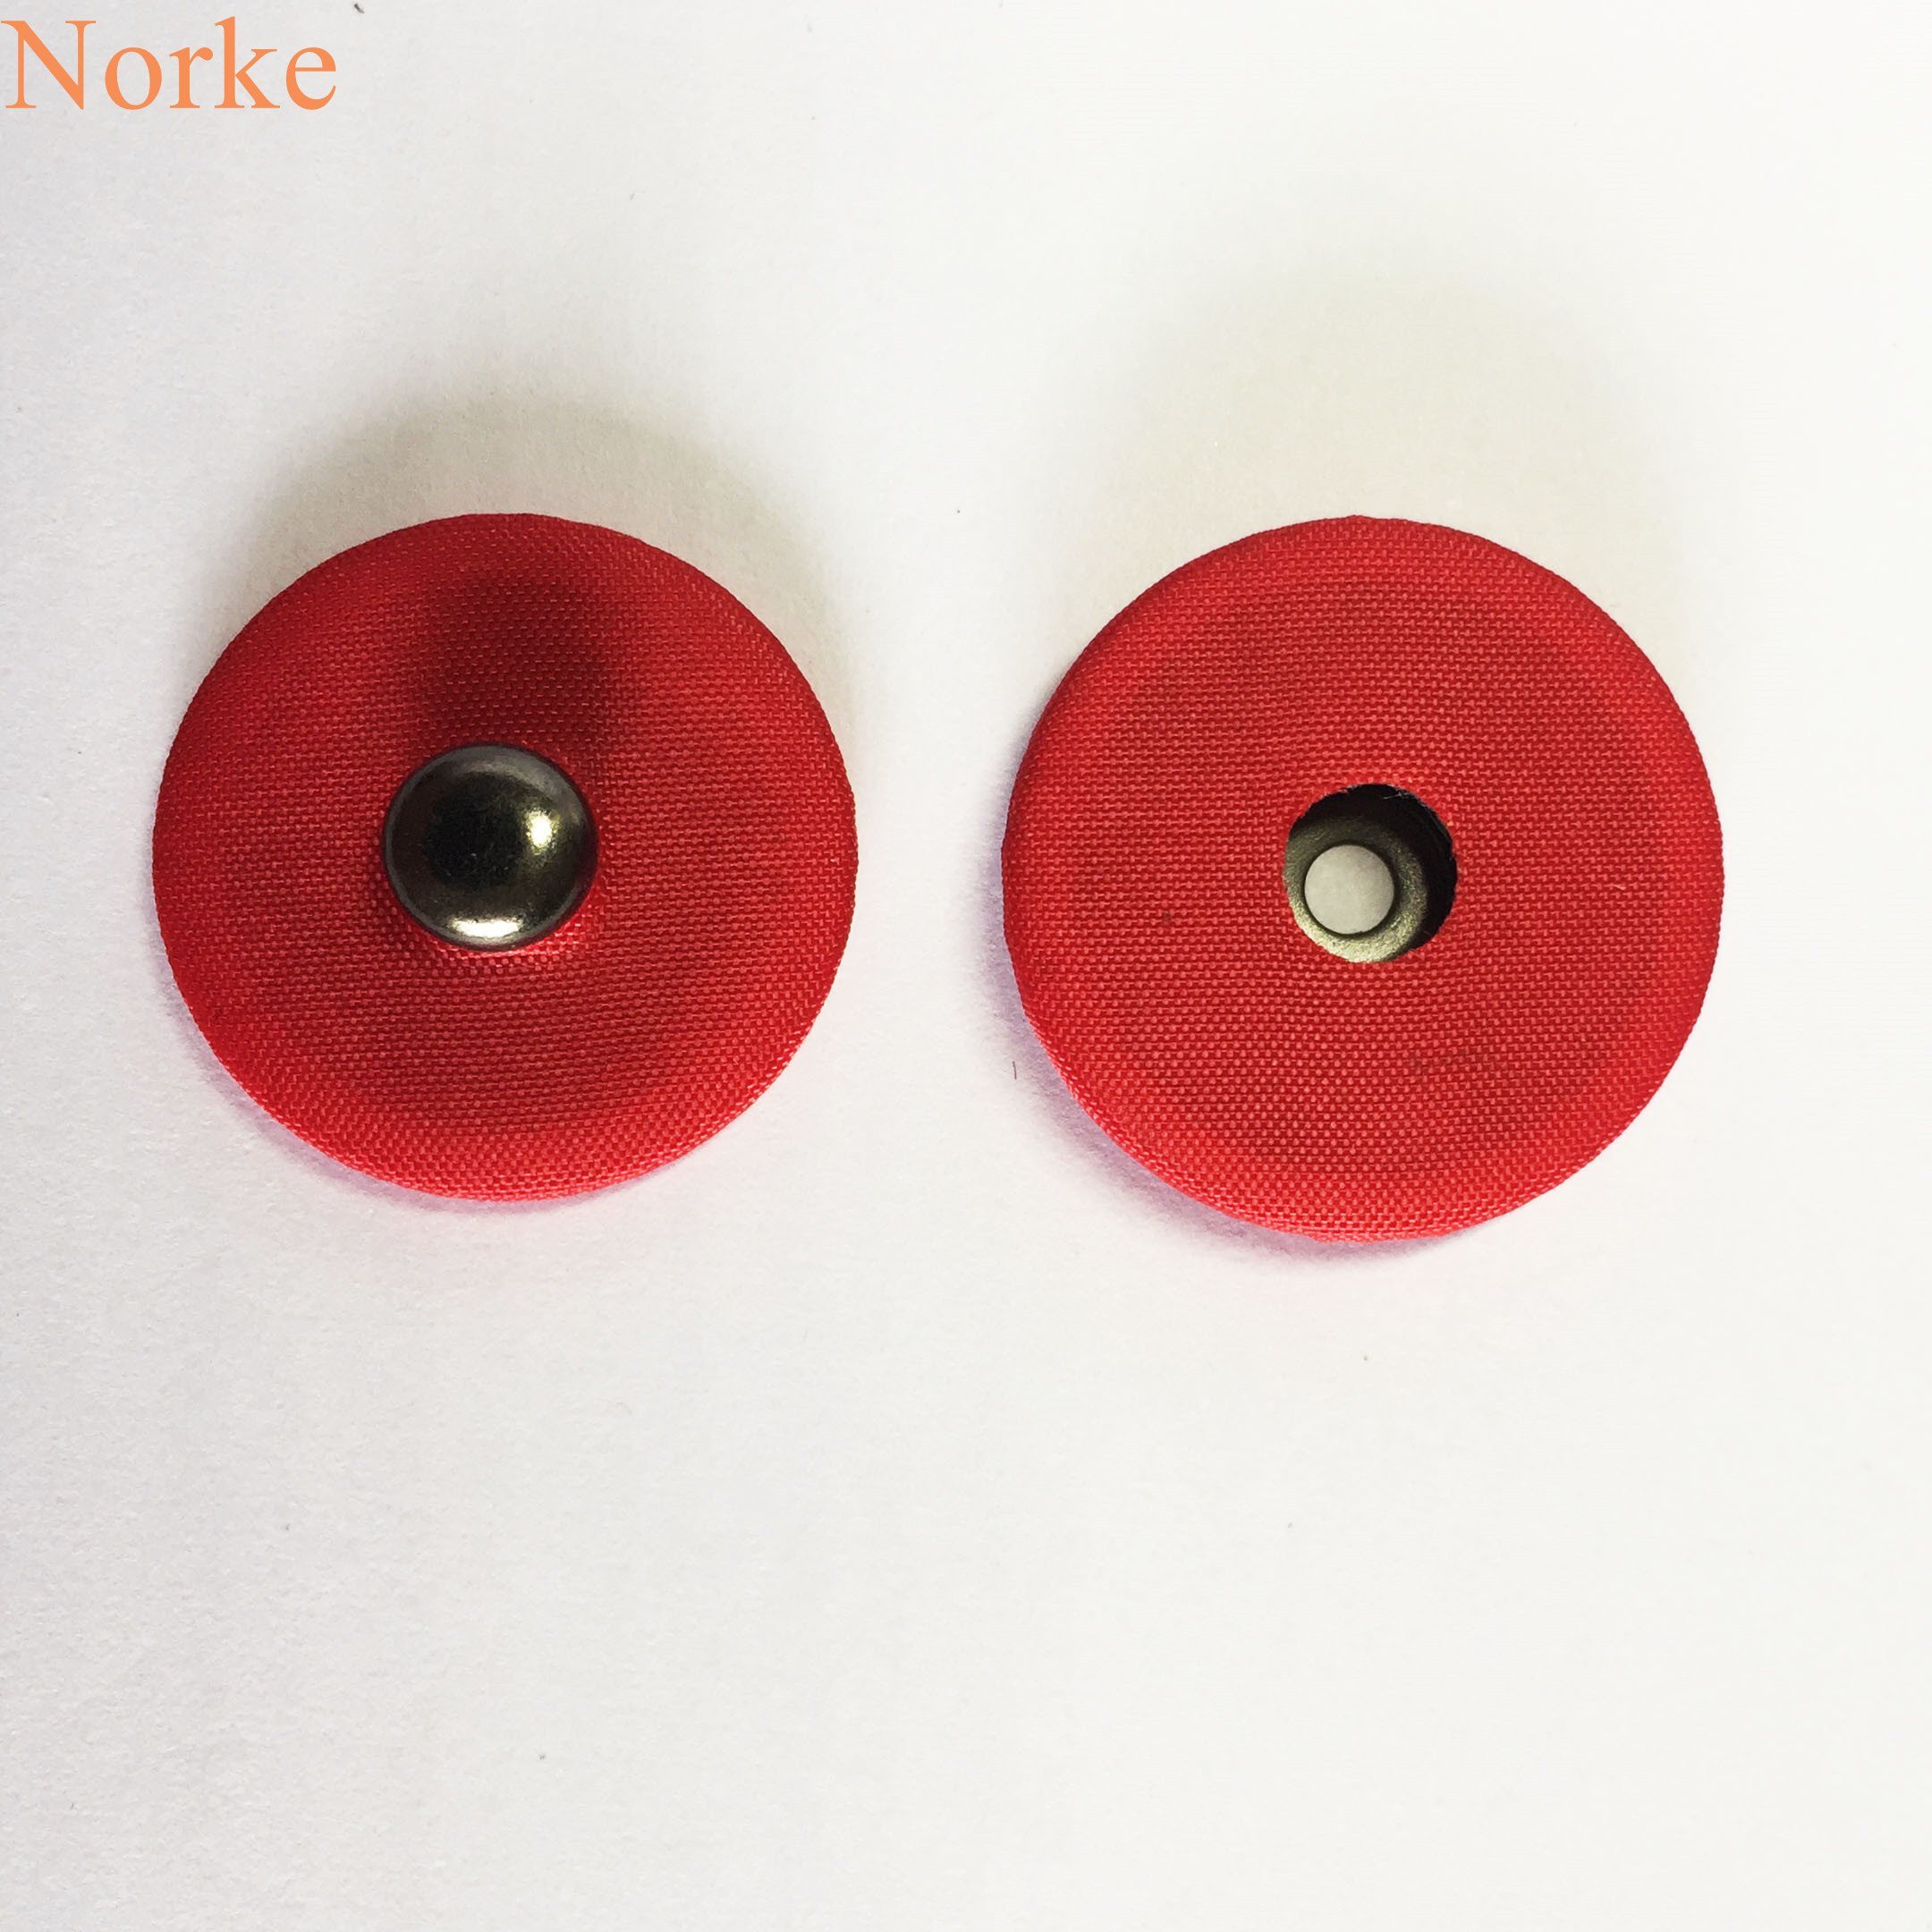 Fashion Accessories Sewing Metal Button with Fabric Covered